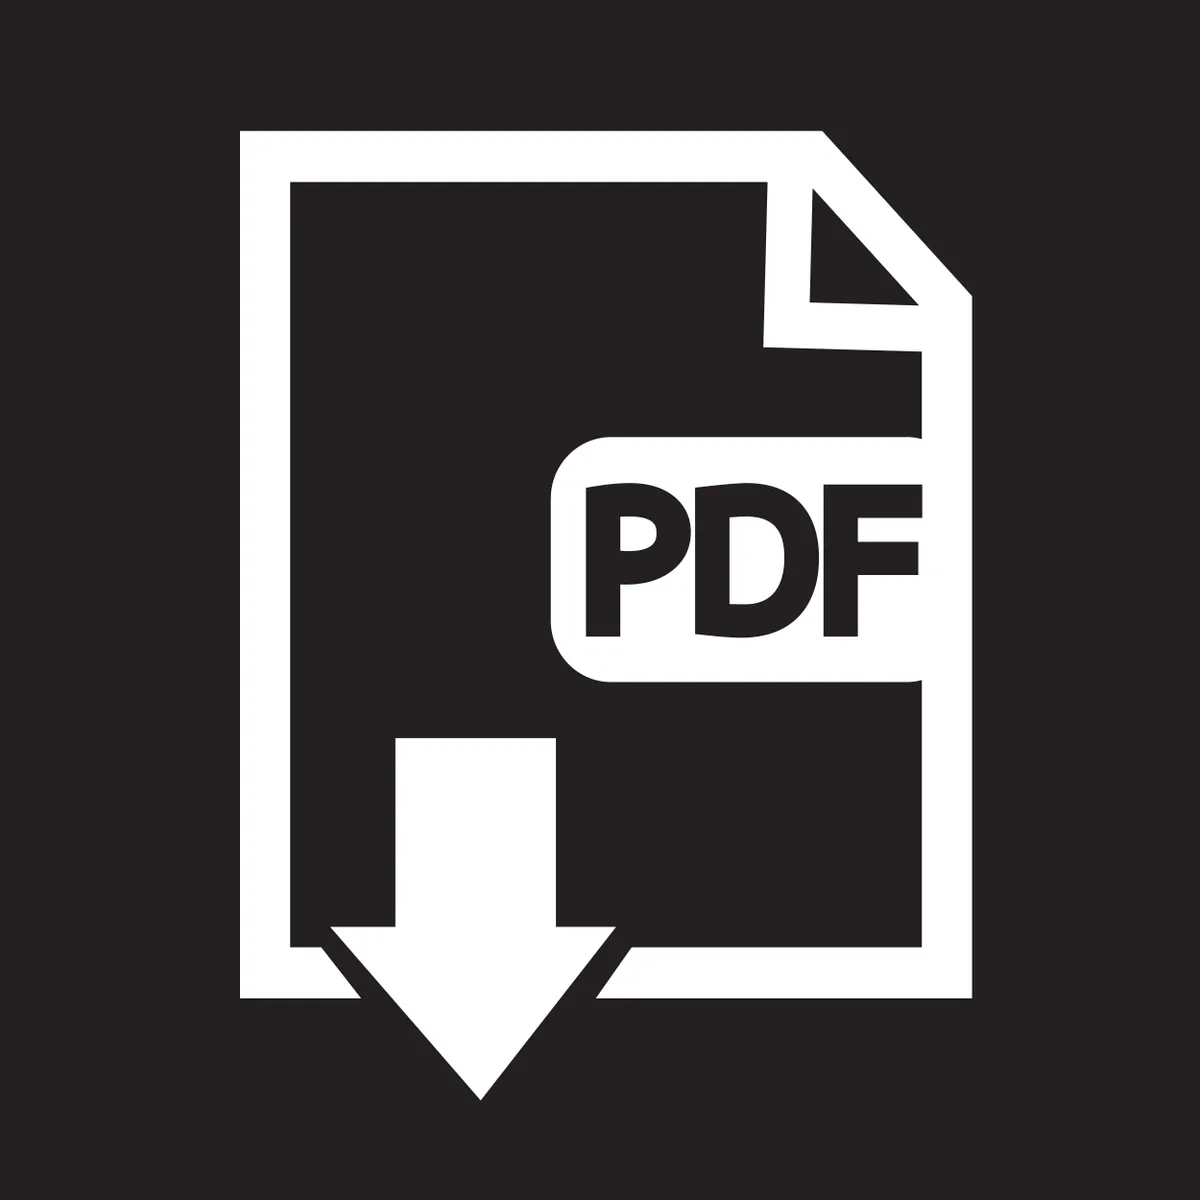 Abstract icon representing PDF download option.